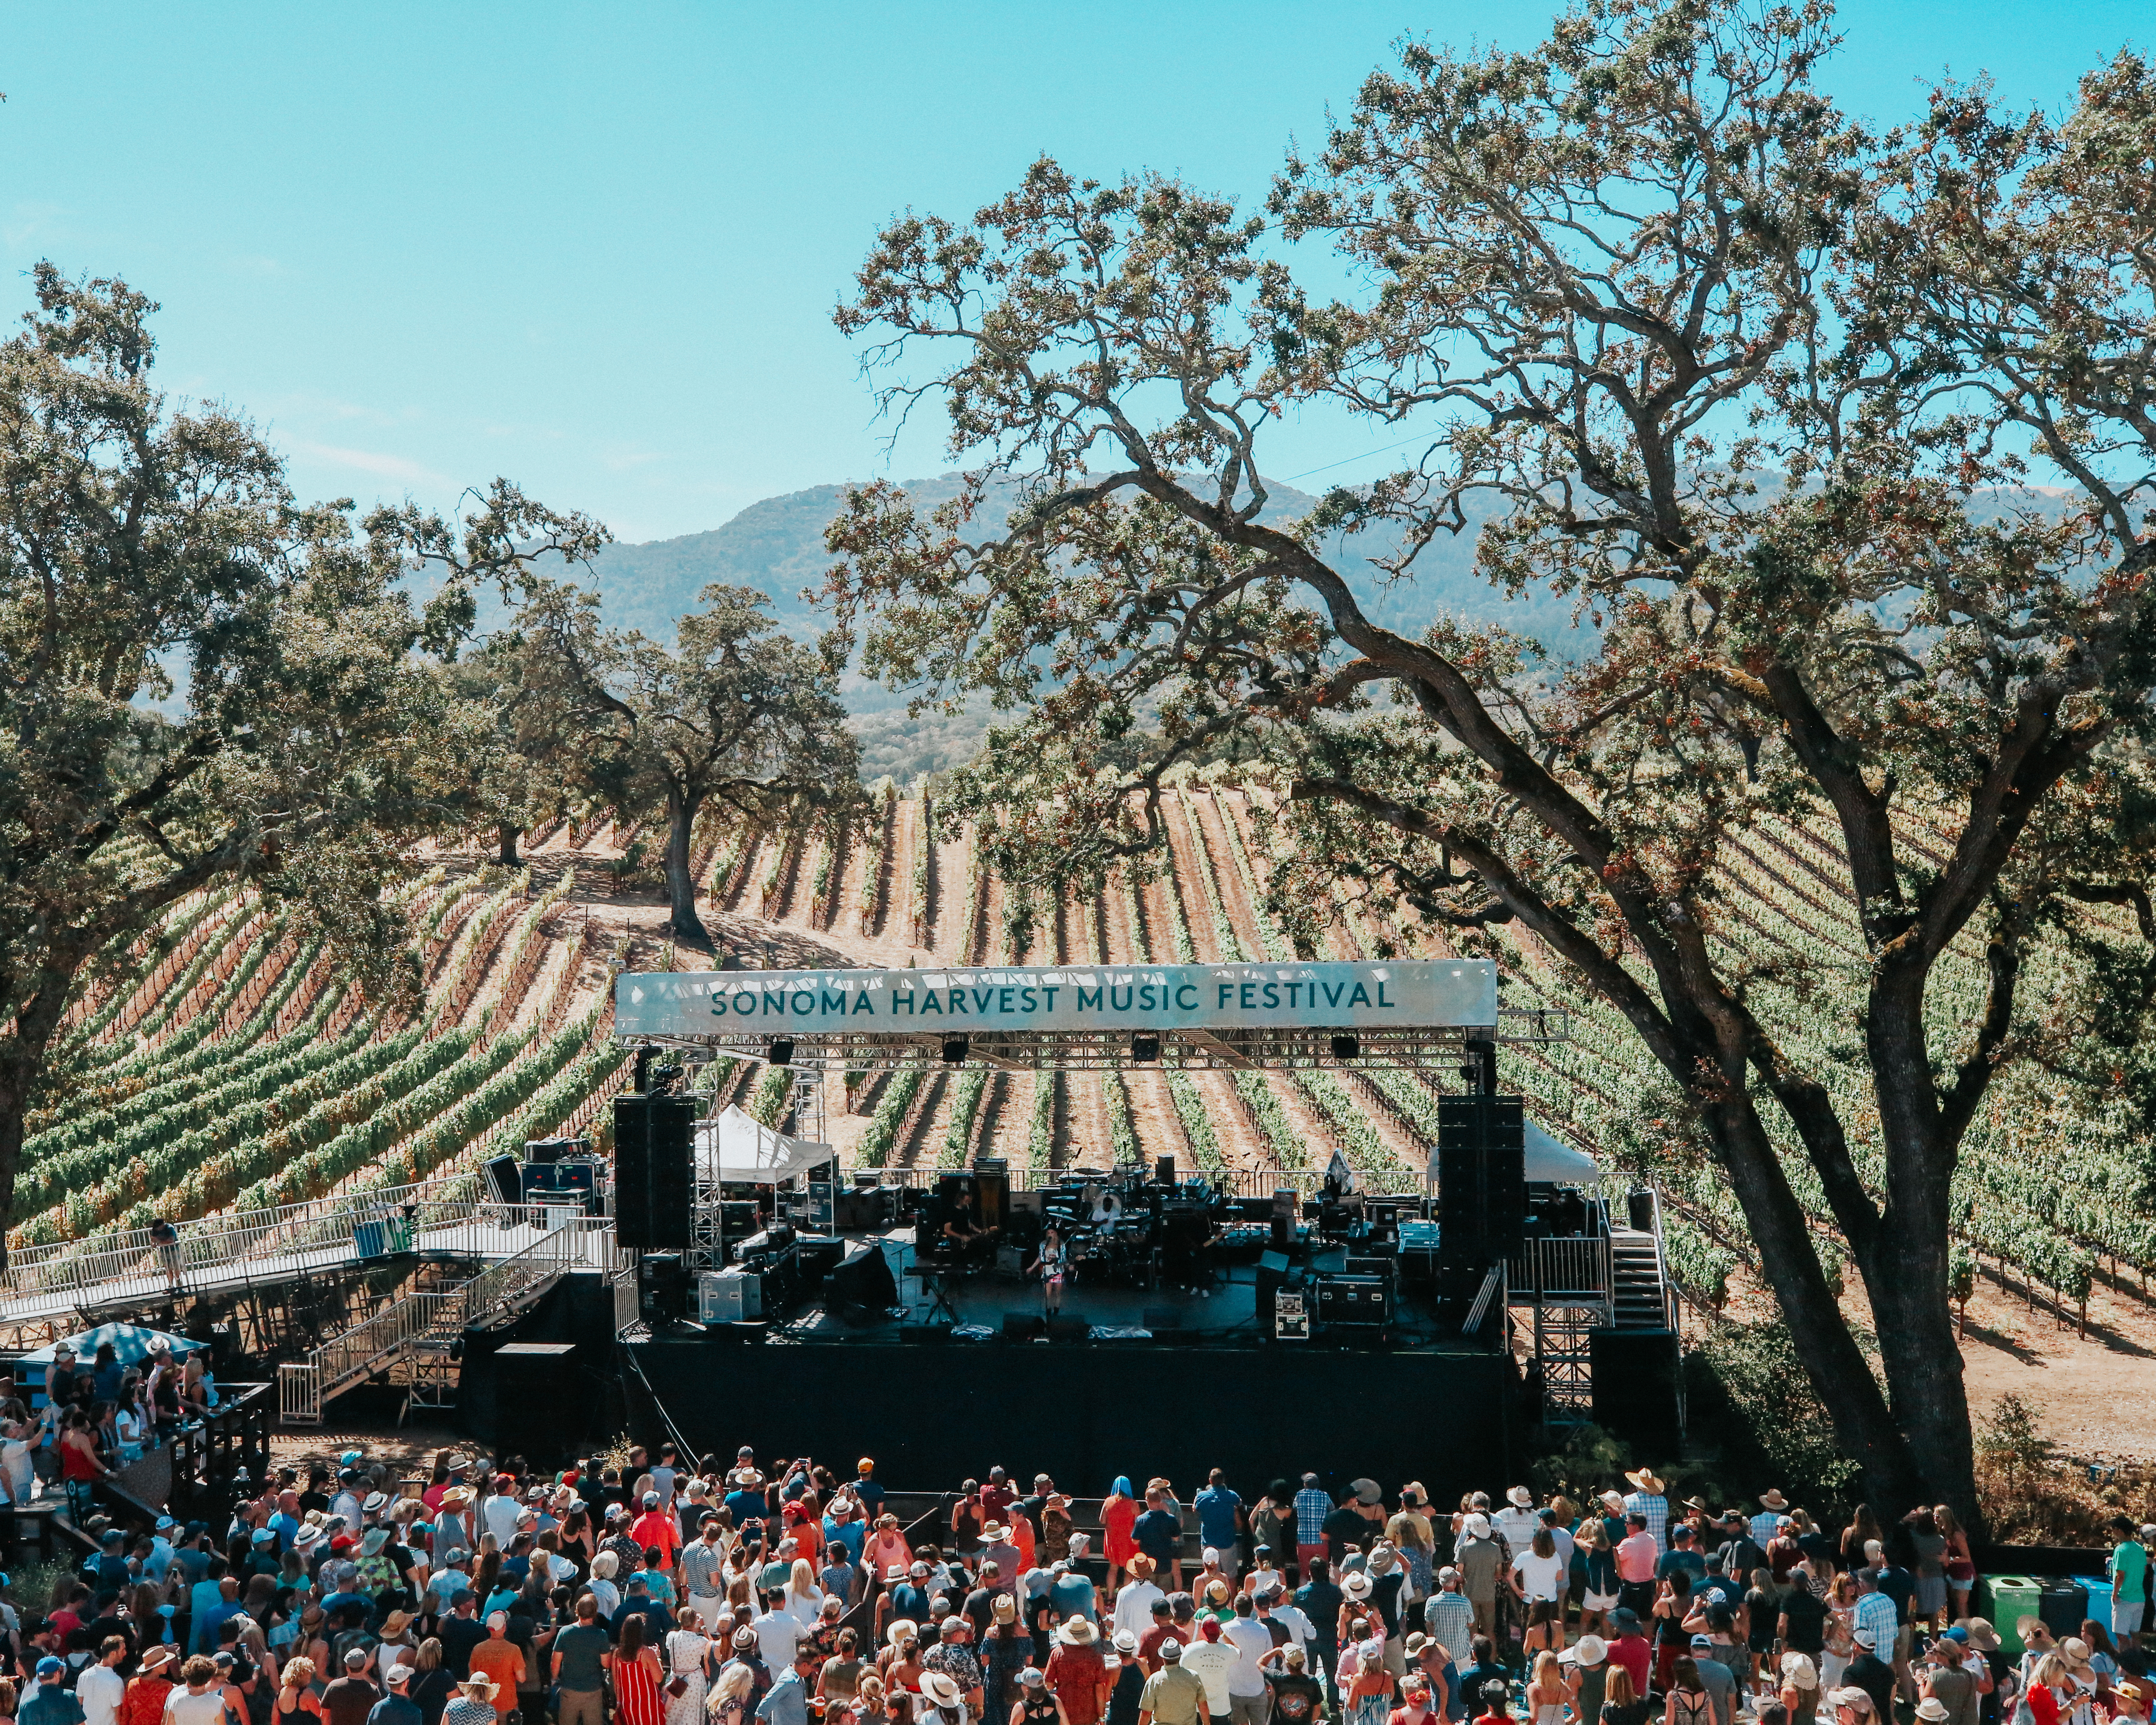 A Winery Hosted A Music Festival And We’re Now Forever Changed